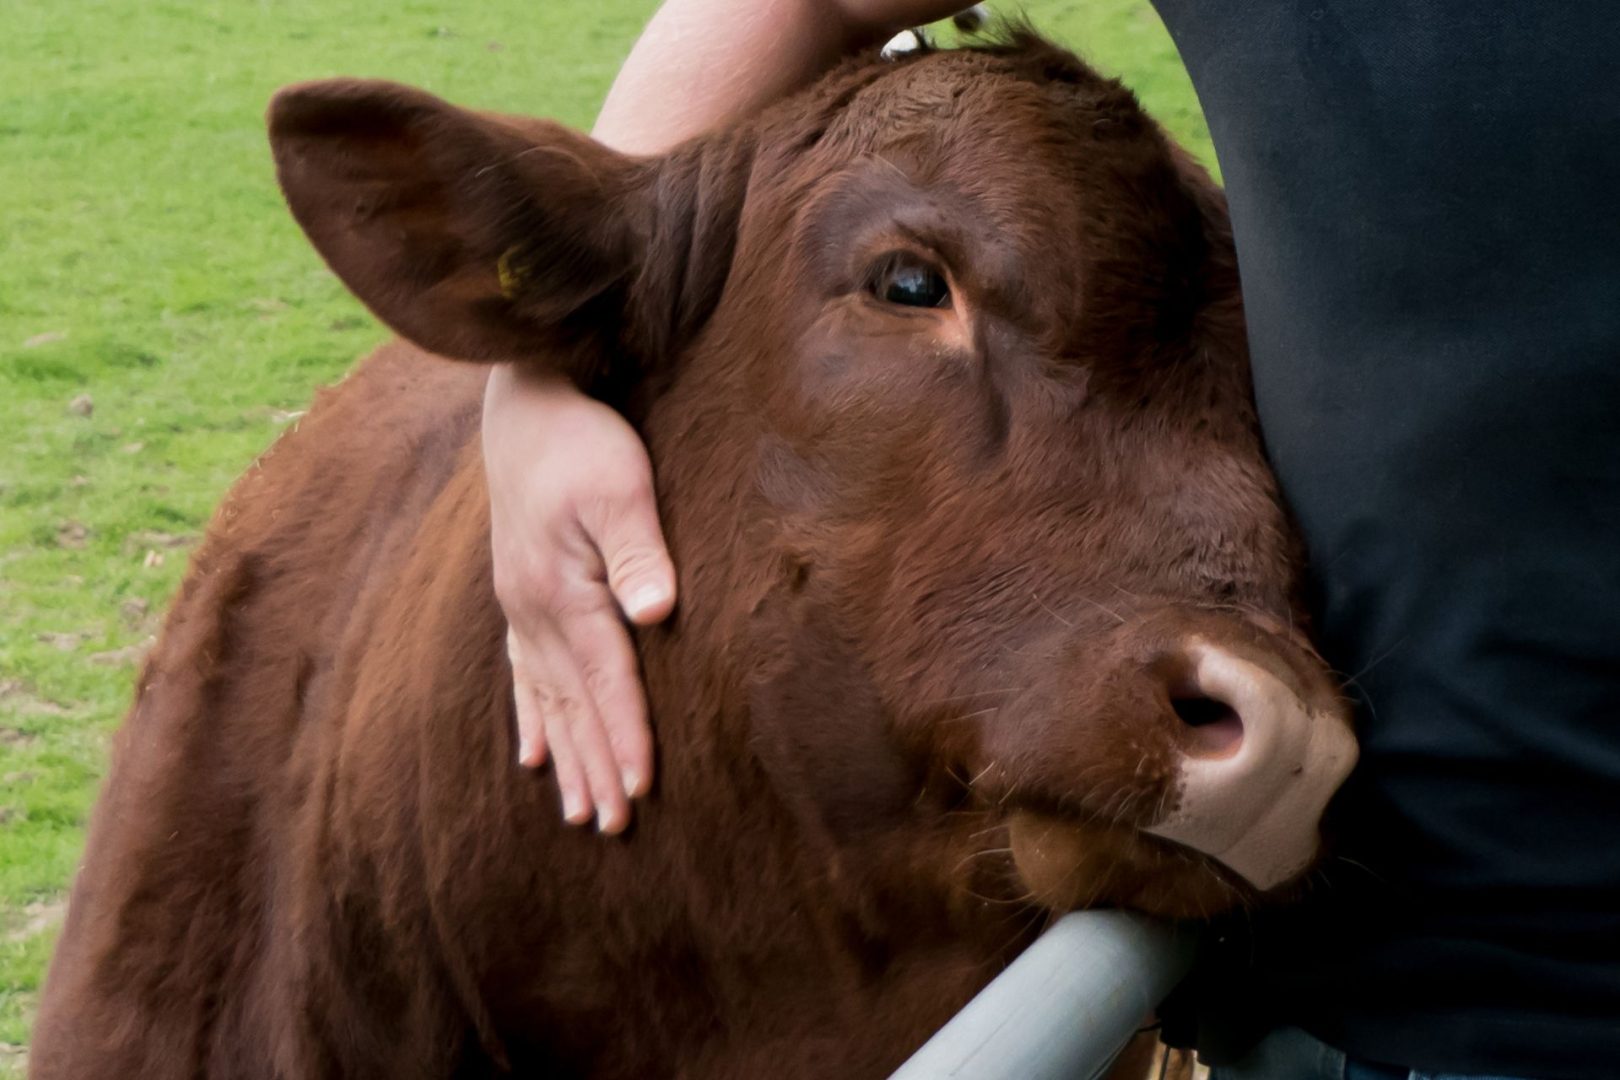 A closeup of a brown cow, a person's hand wrapped around it lovingly.